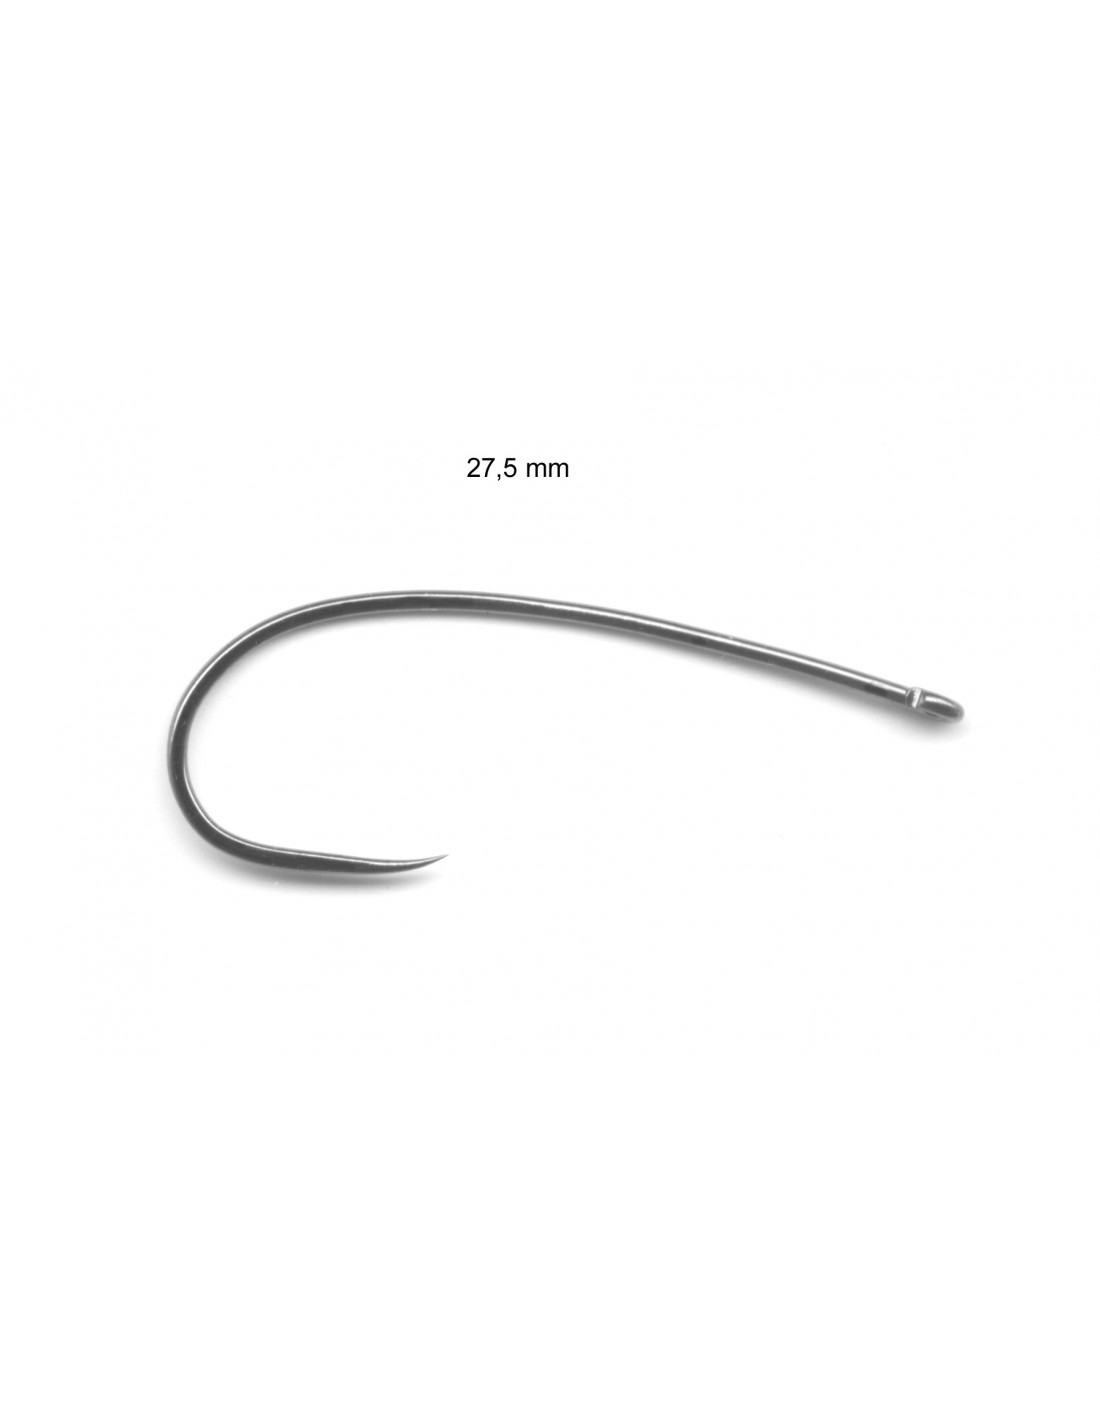 10pcs/Bottle Barbless Fishing Hooks 5H High Carbon Steel Material